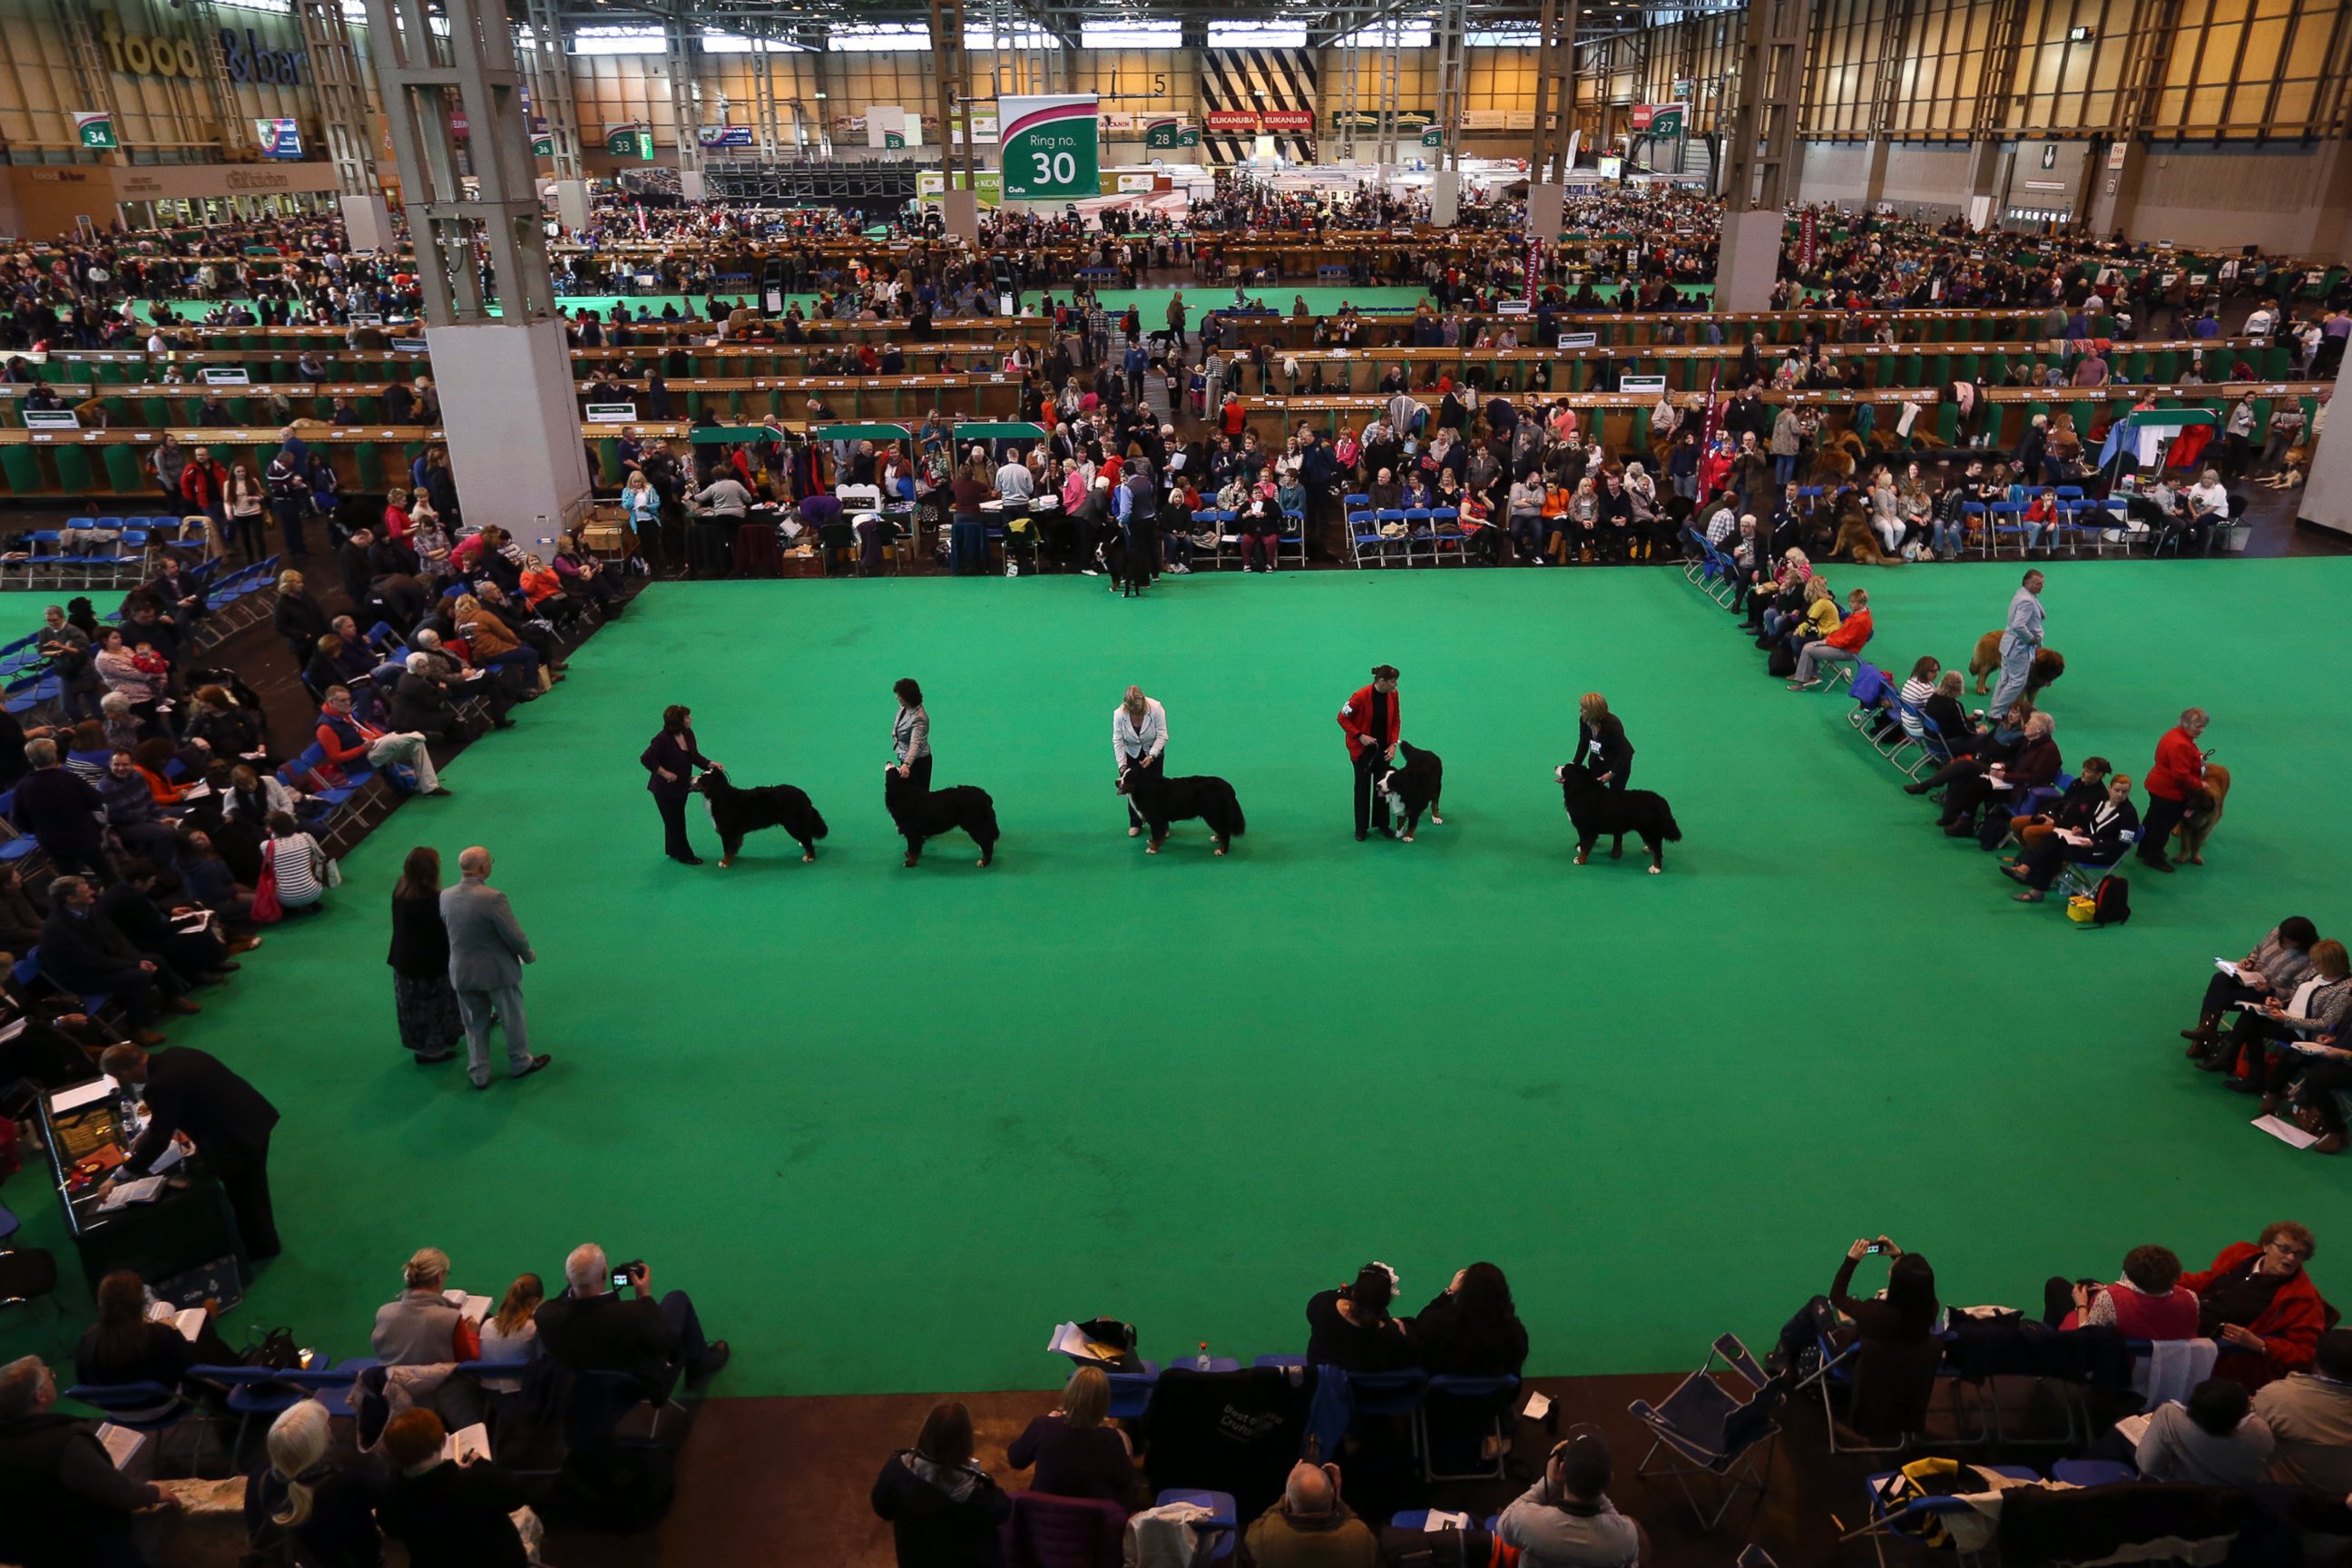 PHOTO: Owners show their dogs on the second day of Crufts dog show at the National Exhibition Centre on March 6, 2015 in Birmingham, England.